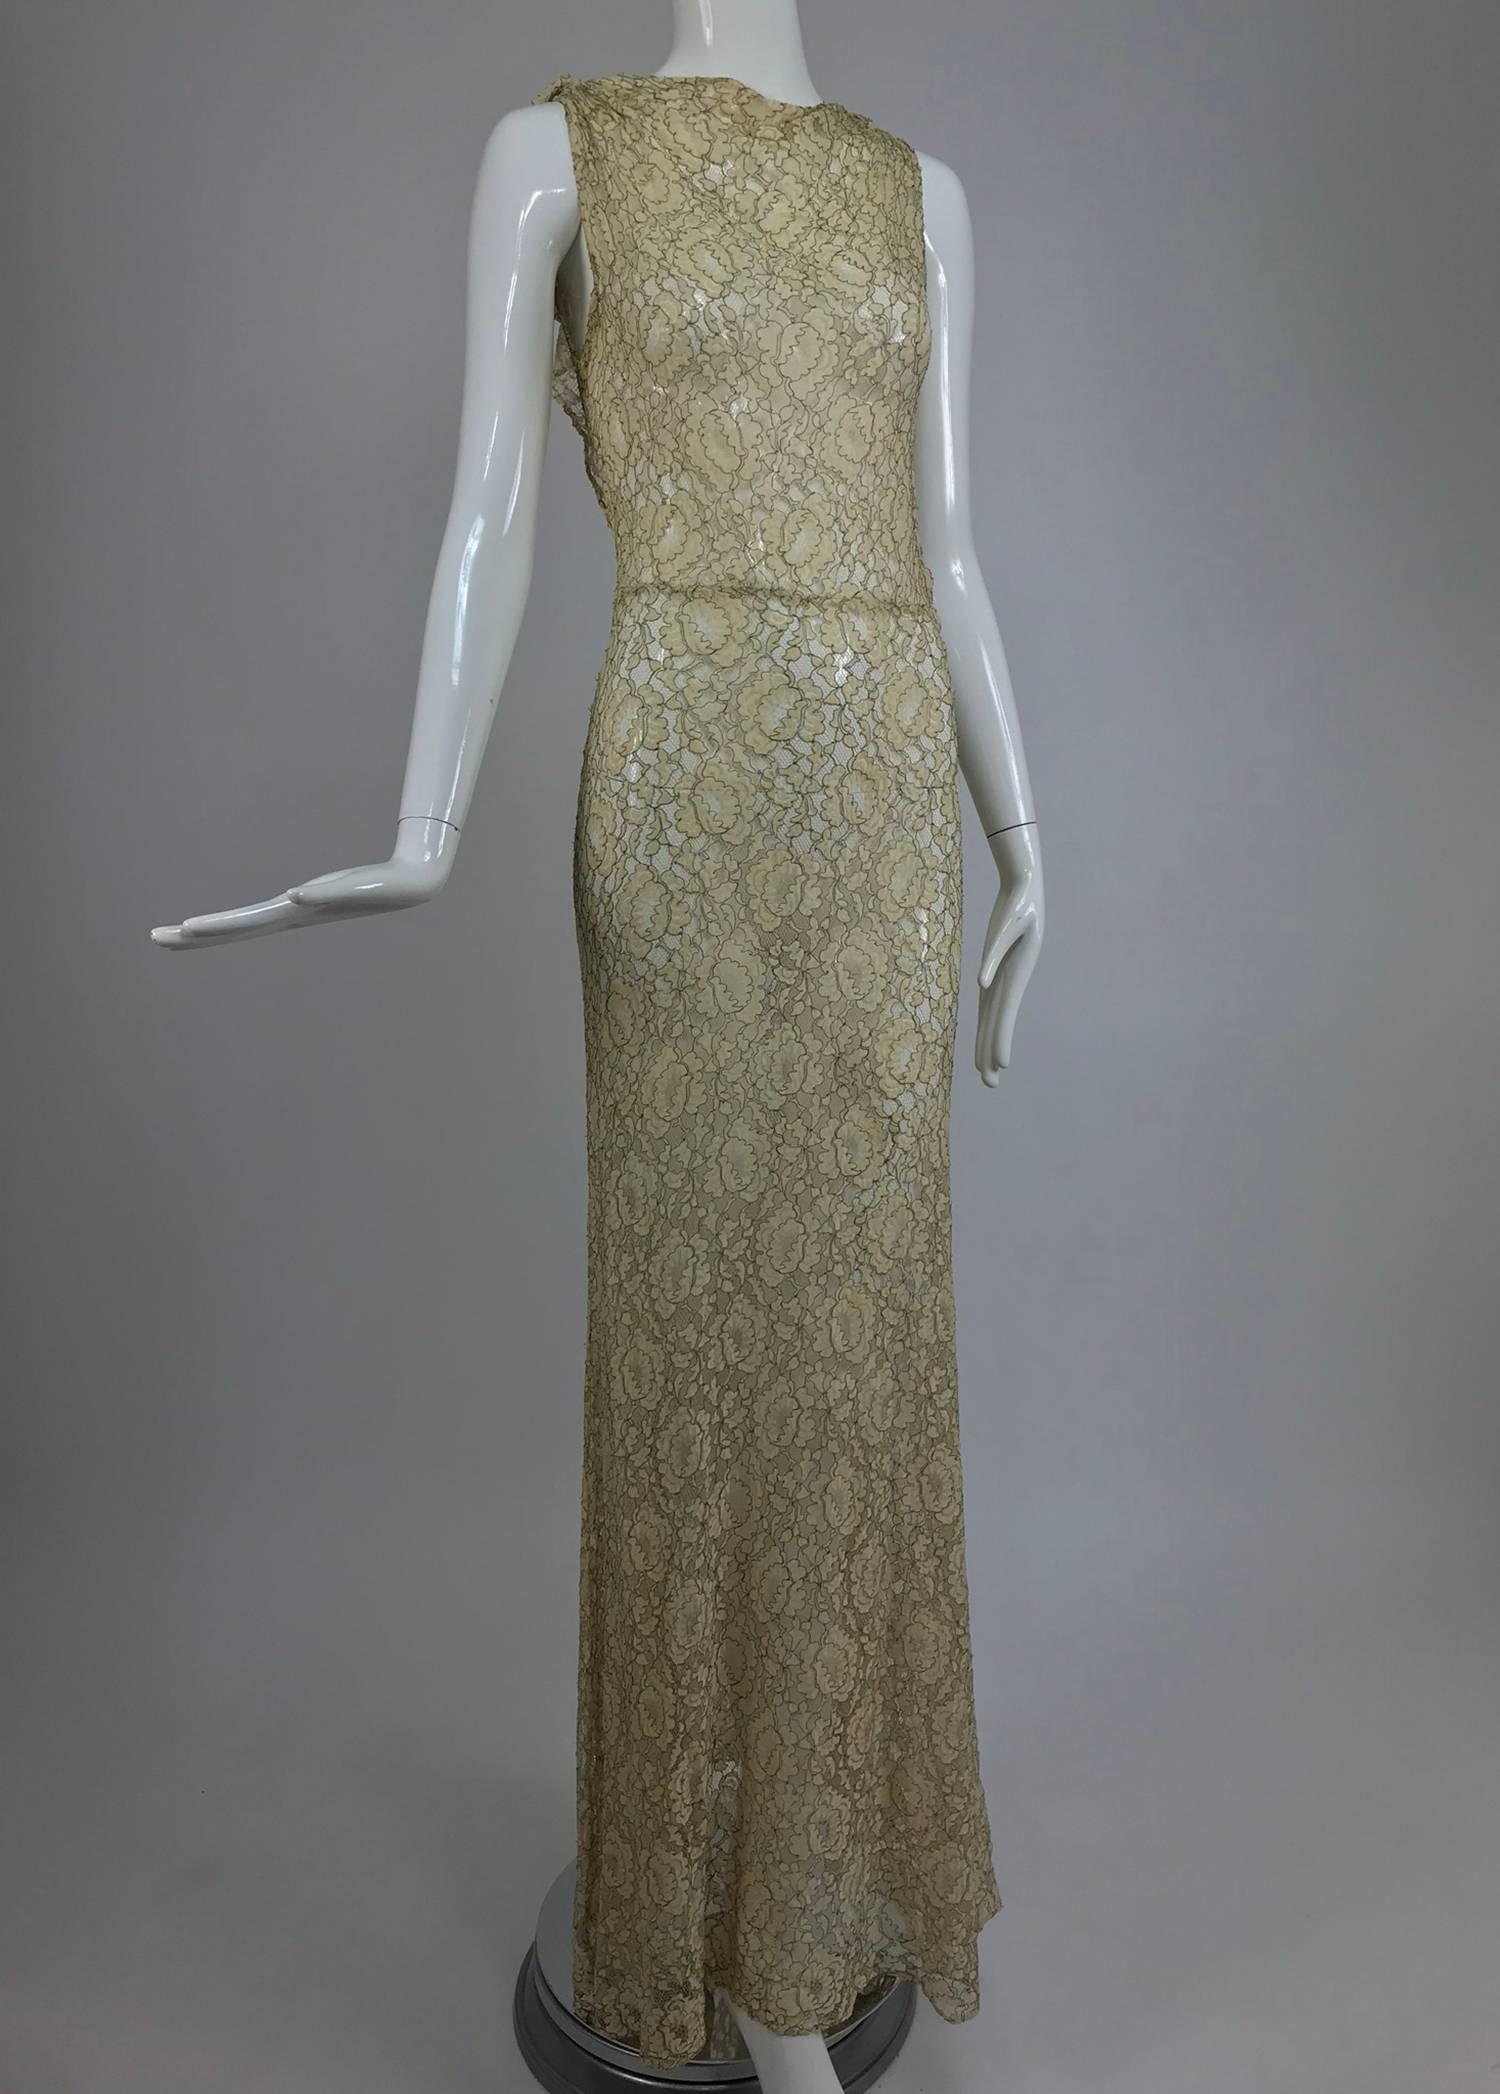 1930s Mixed gold metallic thread cream lace evening dress. This beautiful dress would make an amazing wedding gown. The fabric is cream lace that is re embroidered with gold metallic thread, giving the dress a very golden look. The neckline is cut